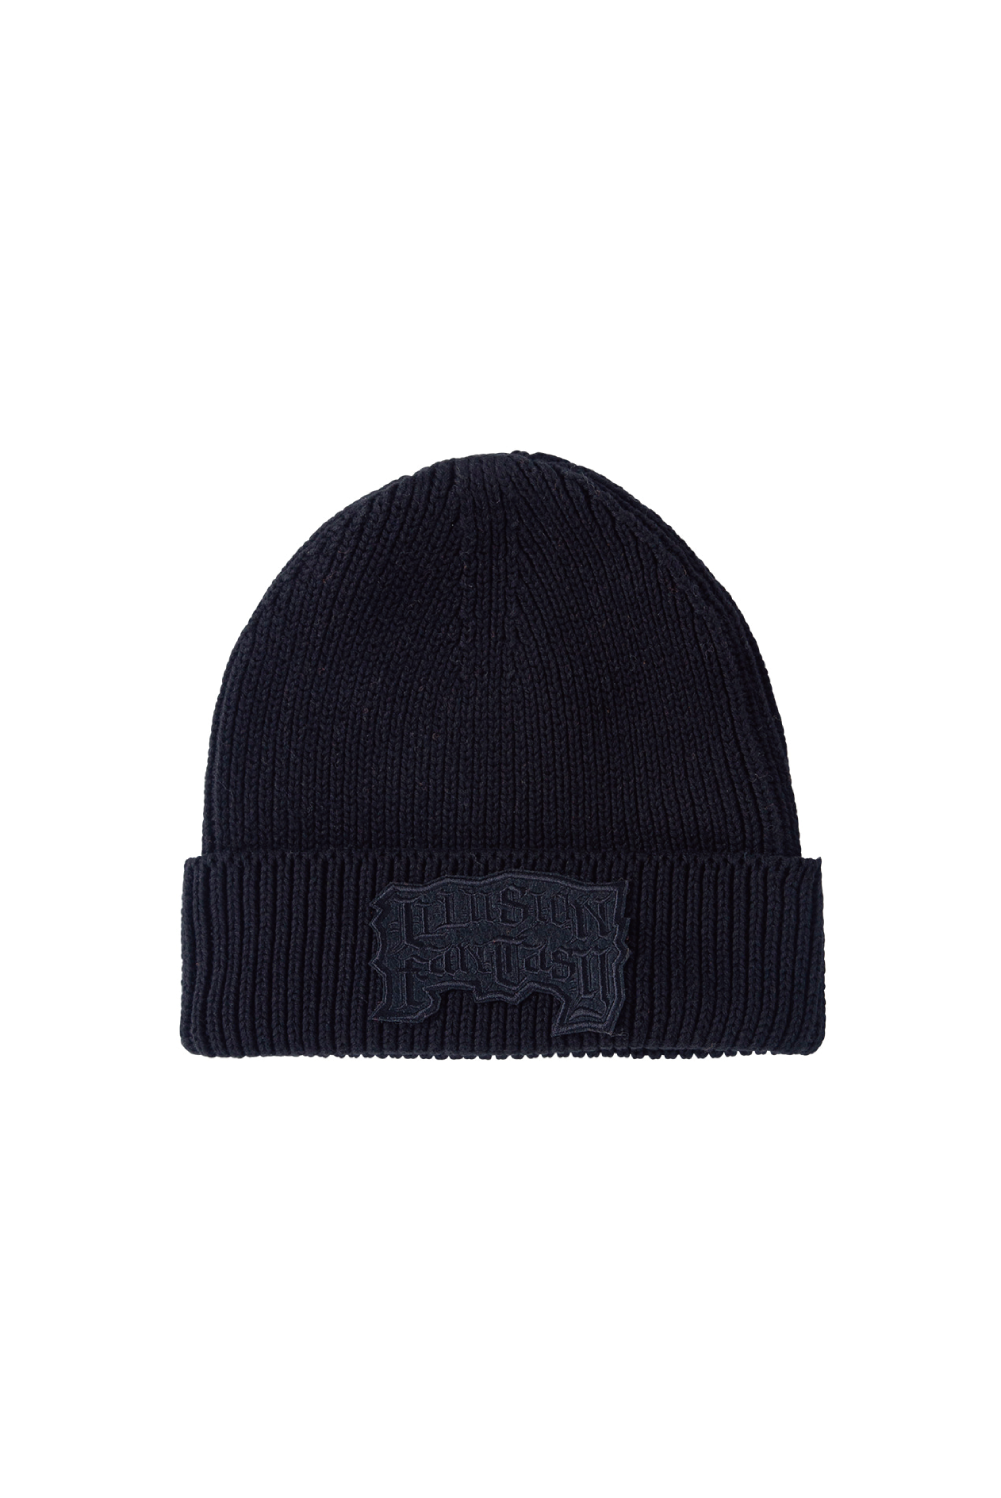 ILLUSION FANTASY PATCHED BEANIE (BLACK)GRAFFITIONMIND